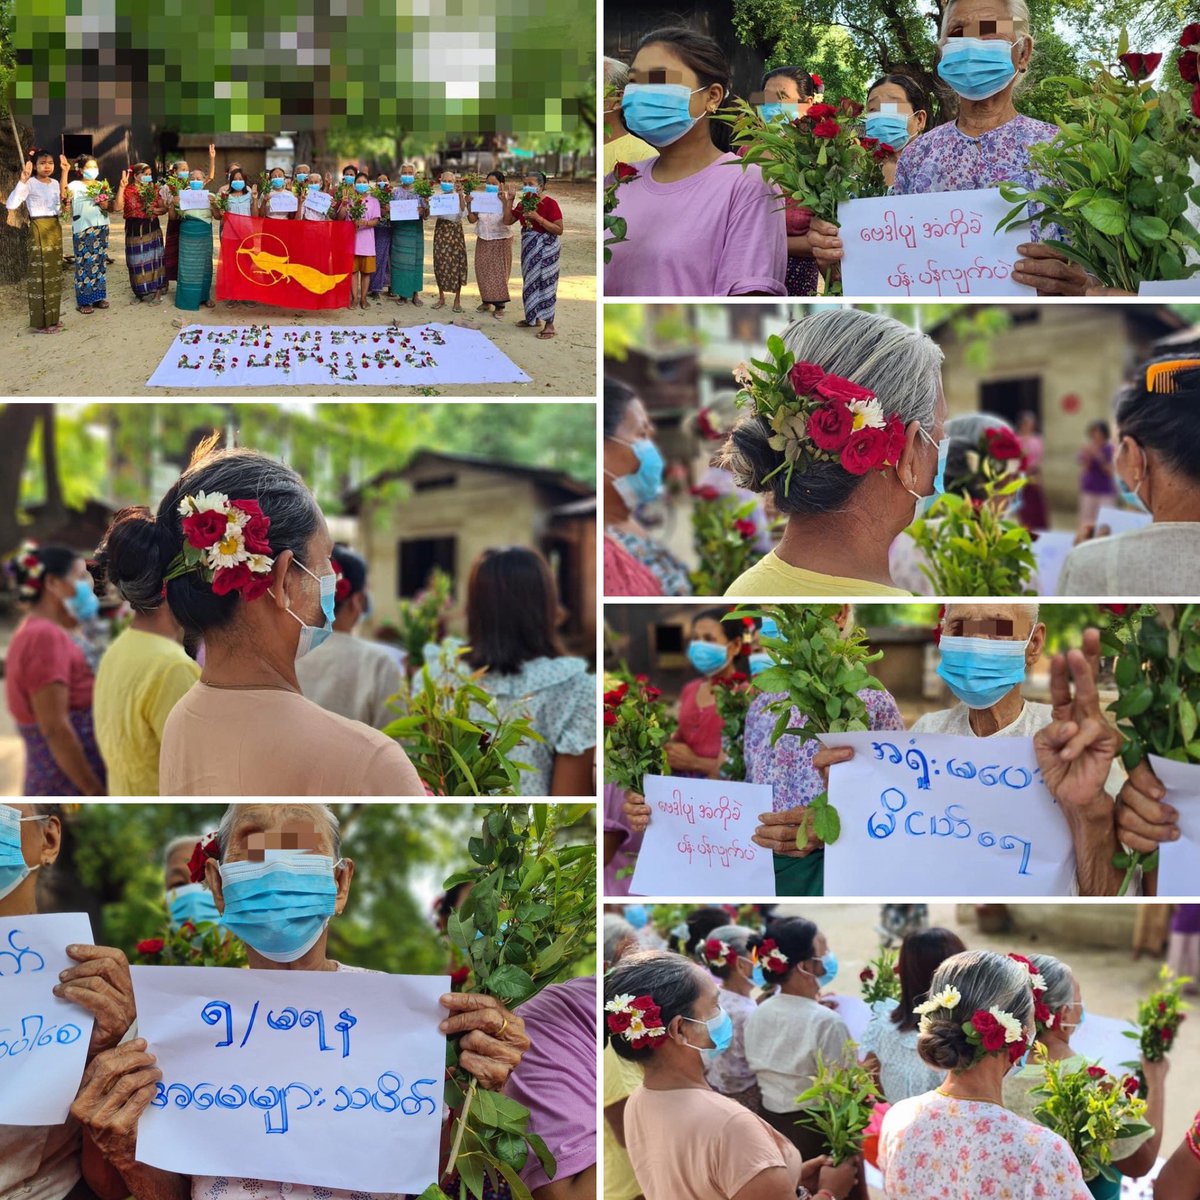 Led by Monywa University Student's Union and residents from a village of #Monywa , staged the #June19_FlowerCampaign to oppose the #MilitaryDictatorship on Jun17.
                         
#2023Jun17Coup 
#Freedom_from_Fear     
#HelpMyanmarIDPs  #WhatsHappeningInMyanmar